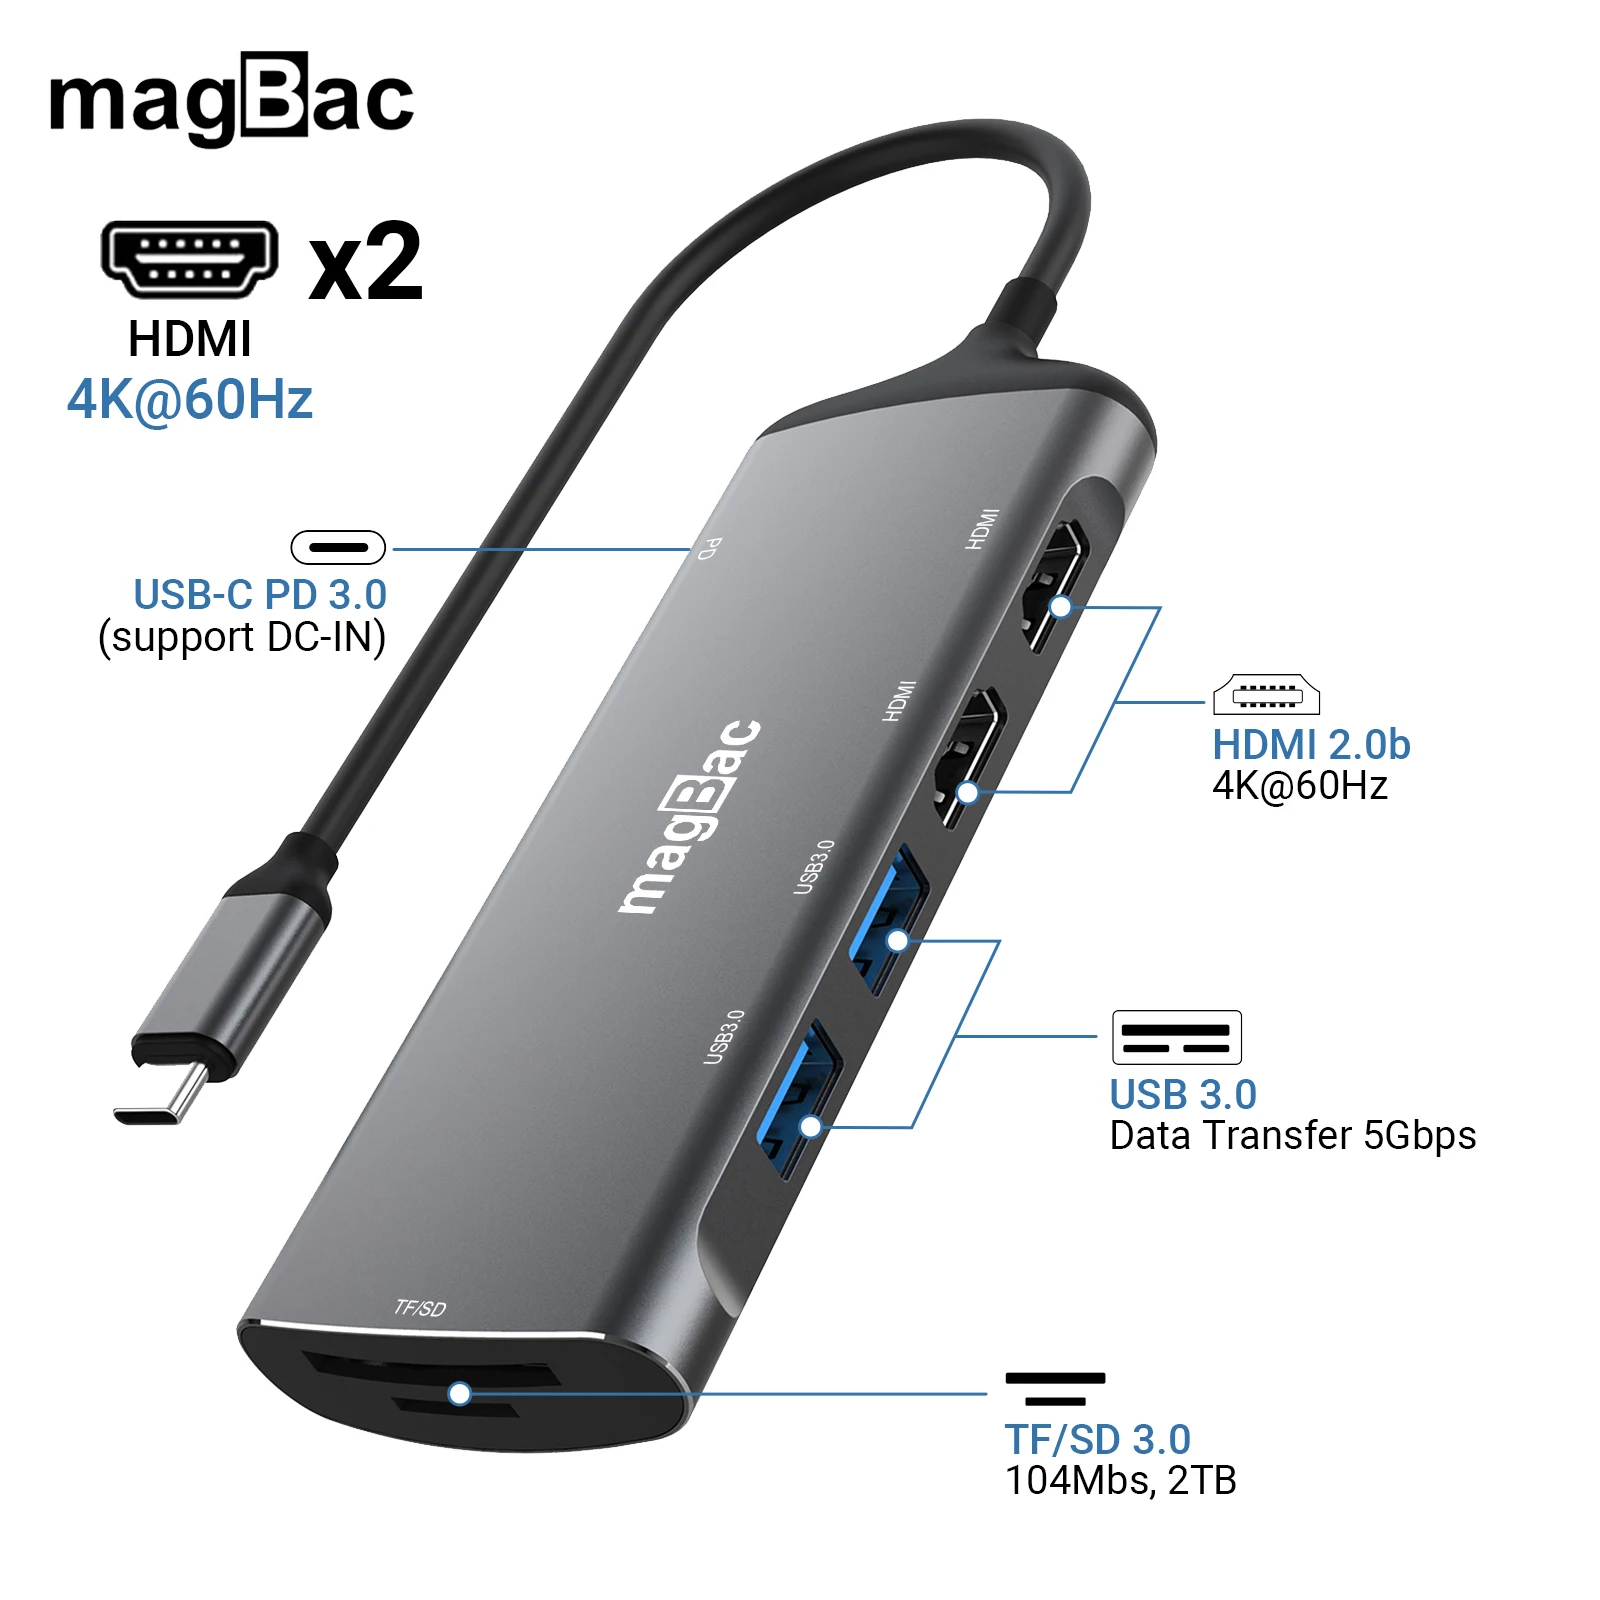 magBac Dual HDMI 4K 60Hz USB Hub Multiple Ports Extend 2 Monitor Docking Station PD 100W Hub USB3.0 for Macbook Pro HP ASUS DELL